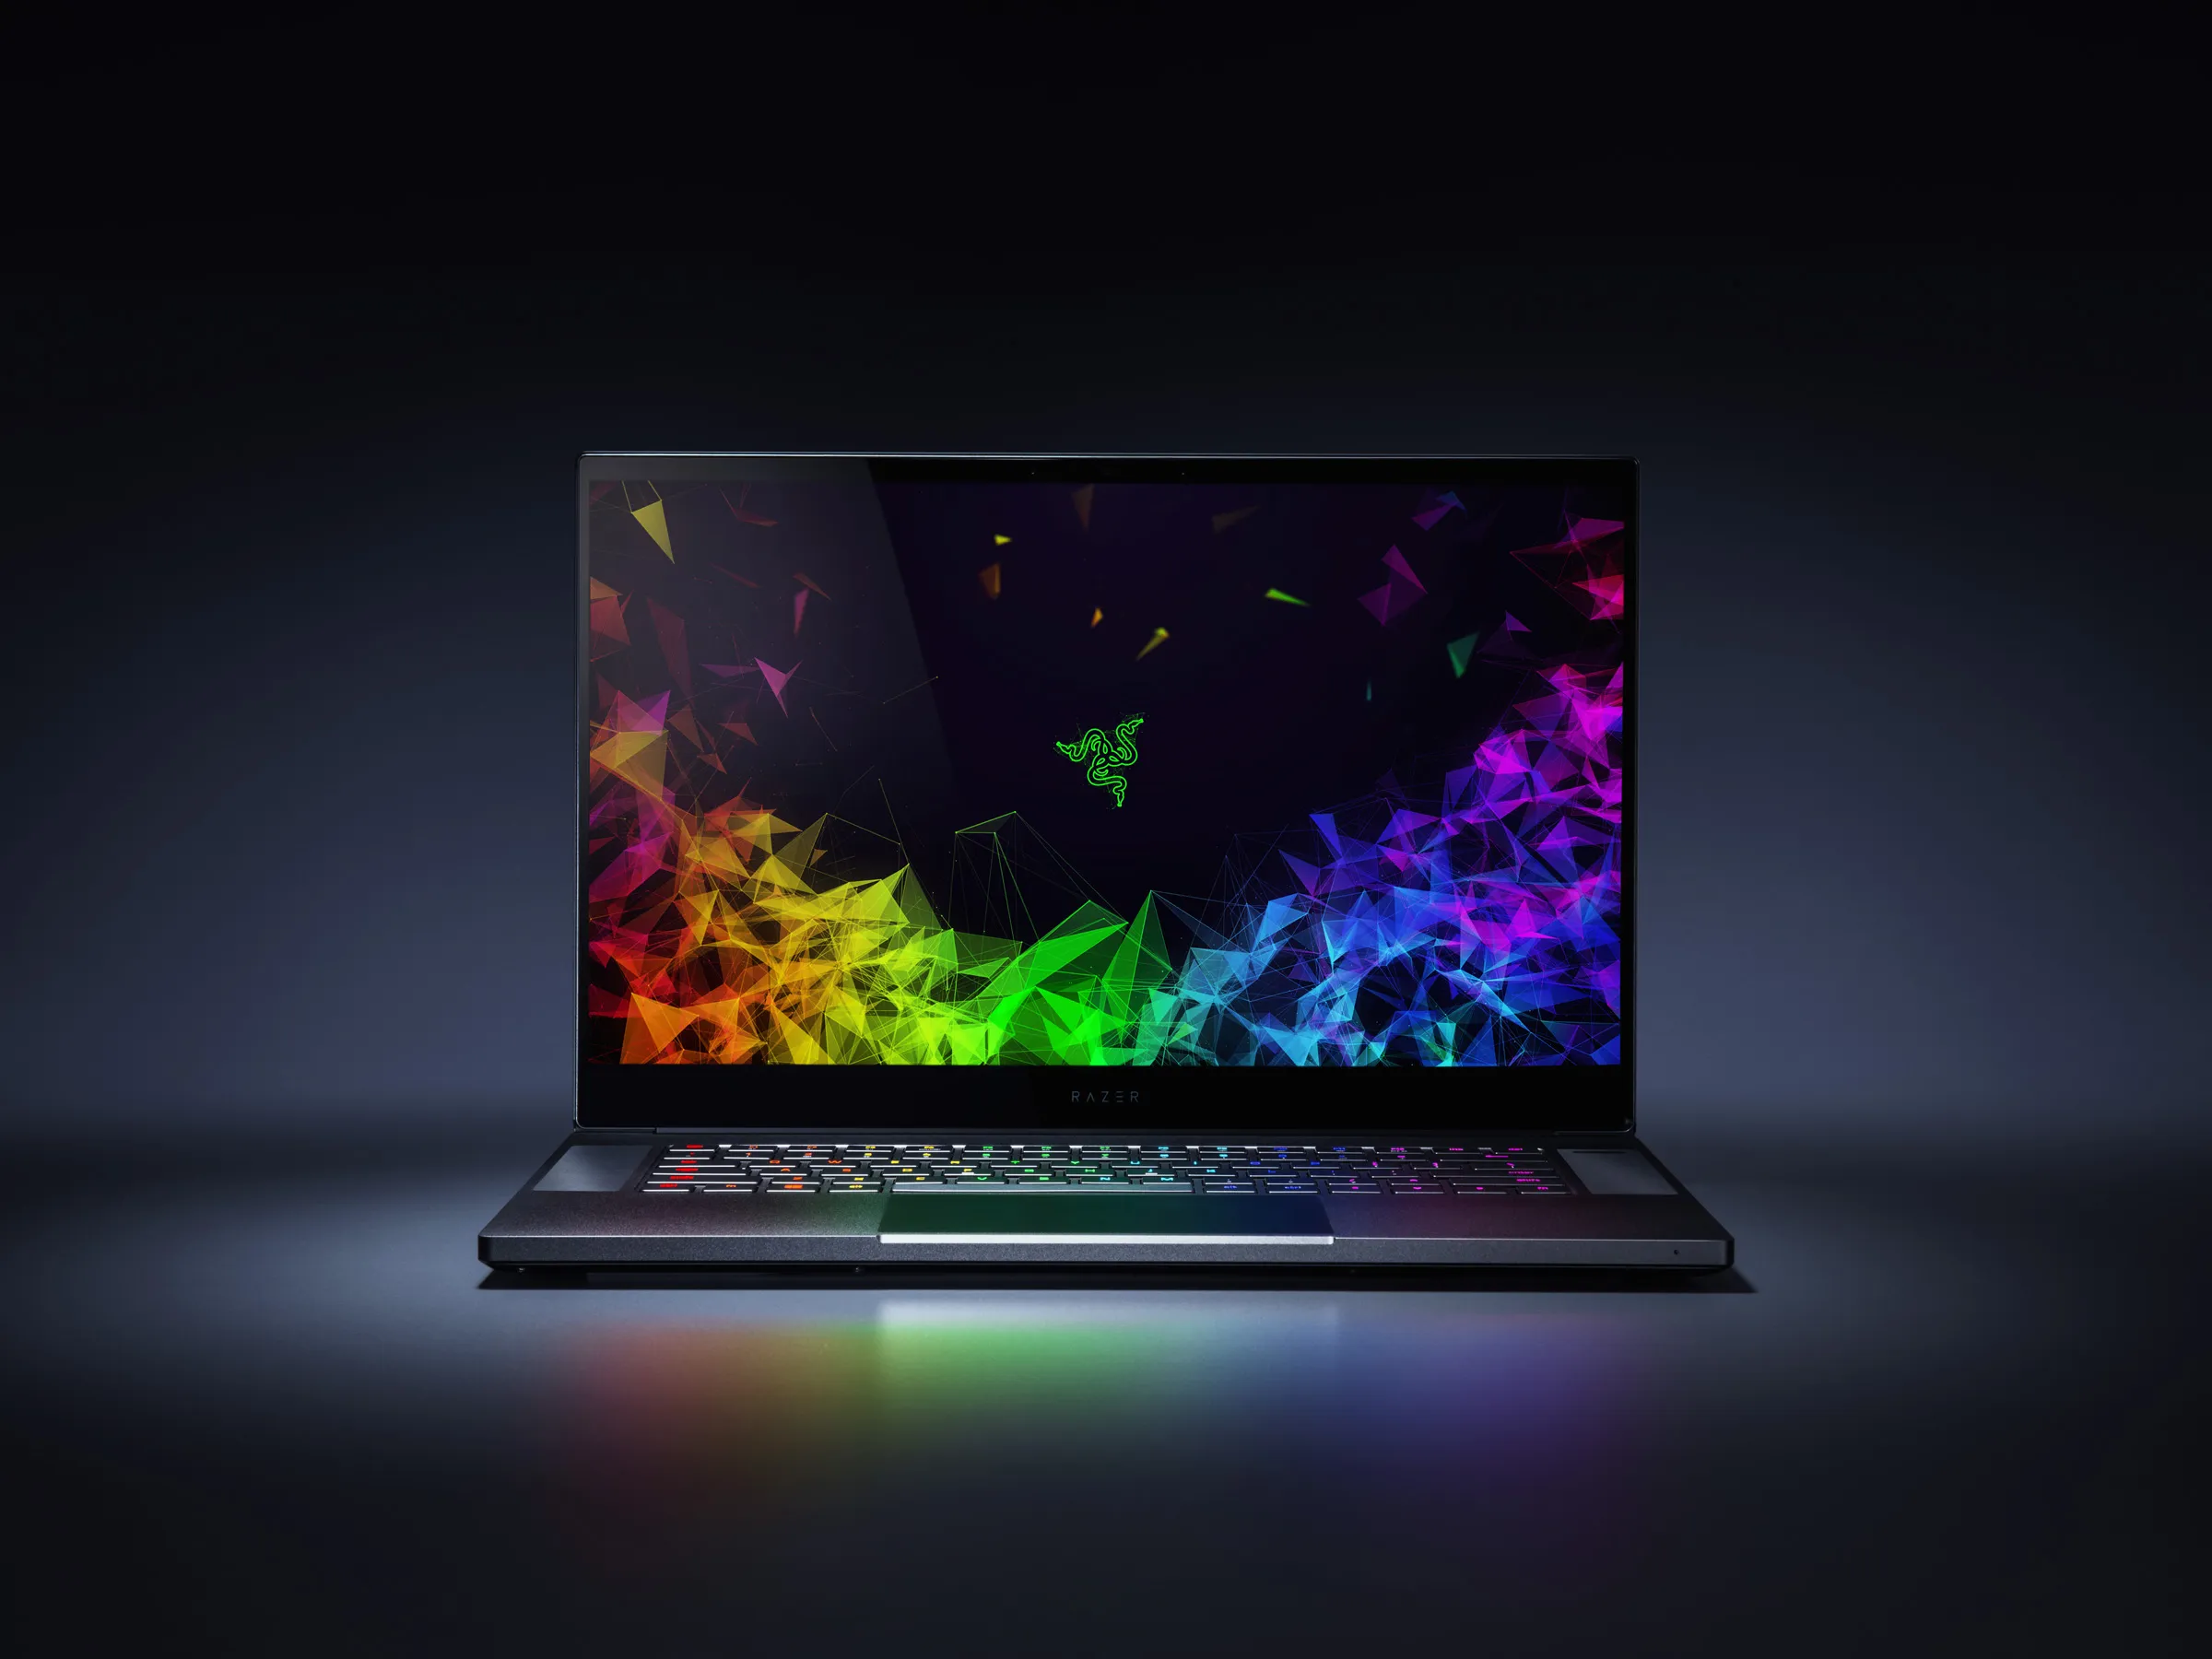 Superfast and furious: A review of the Razer Blade 15 (2023)